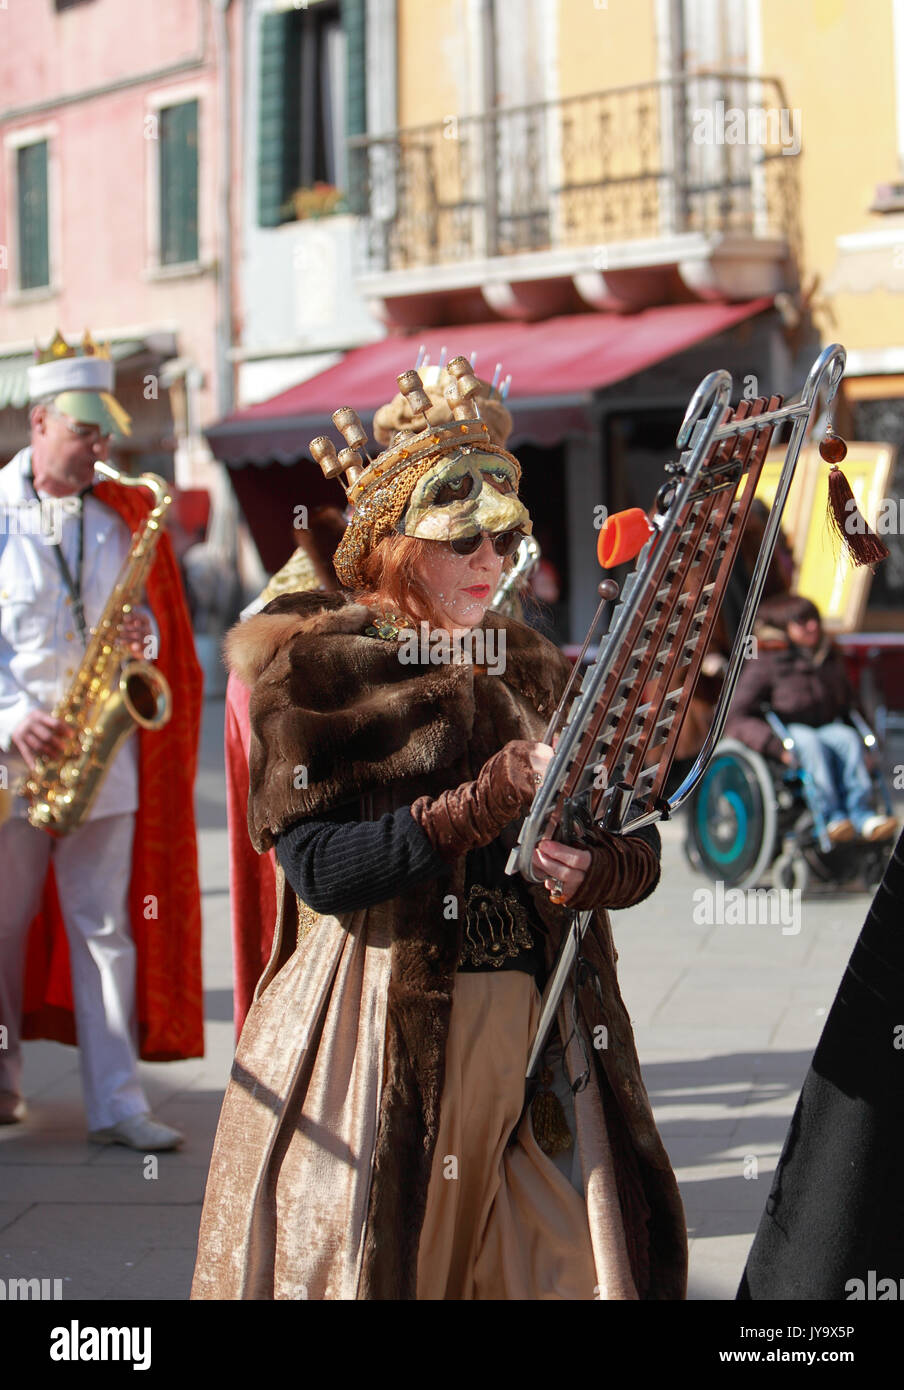 Venice,Italy,February 26th 2011: Portrait of a funny woman xylophone player during a musical parade in Venice during The Carnival days.The Carnival of Stock Photo